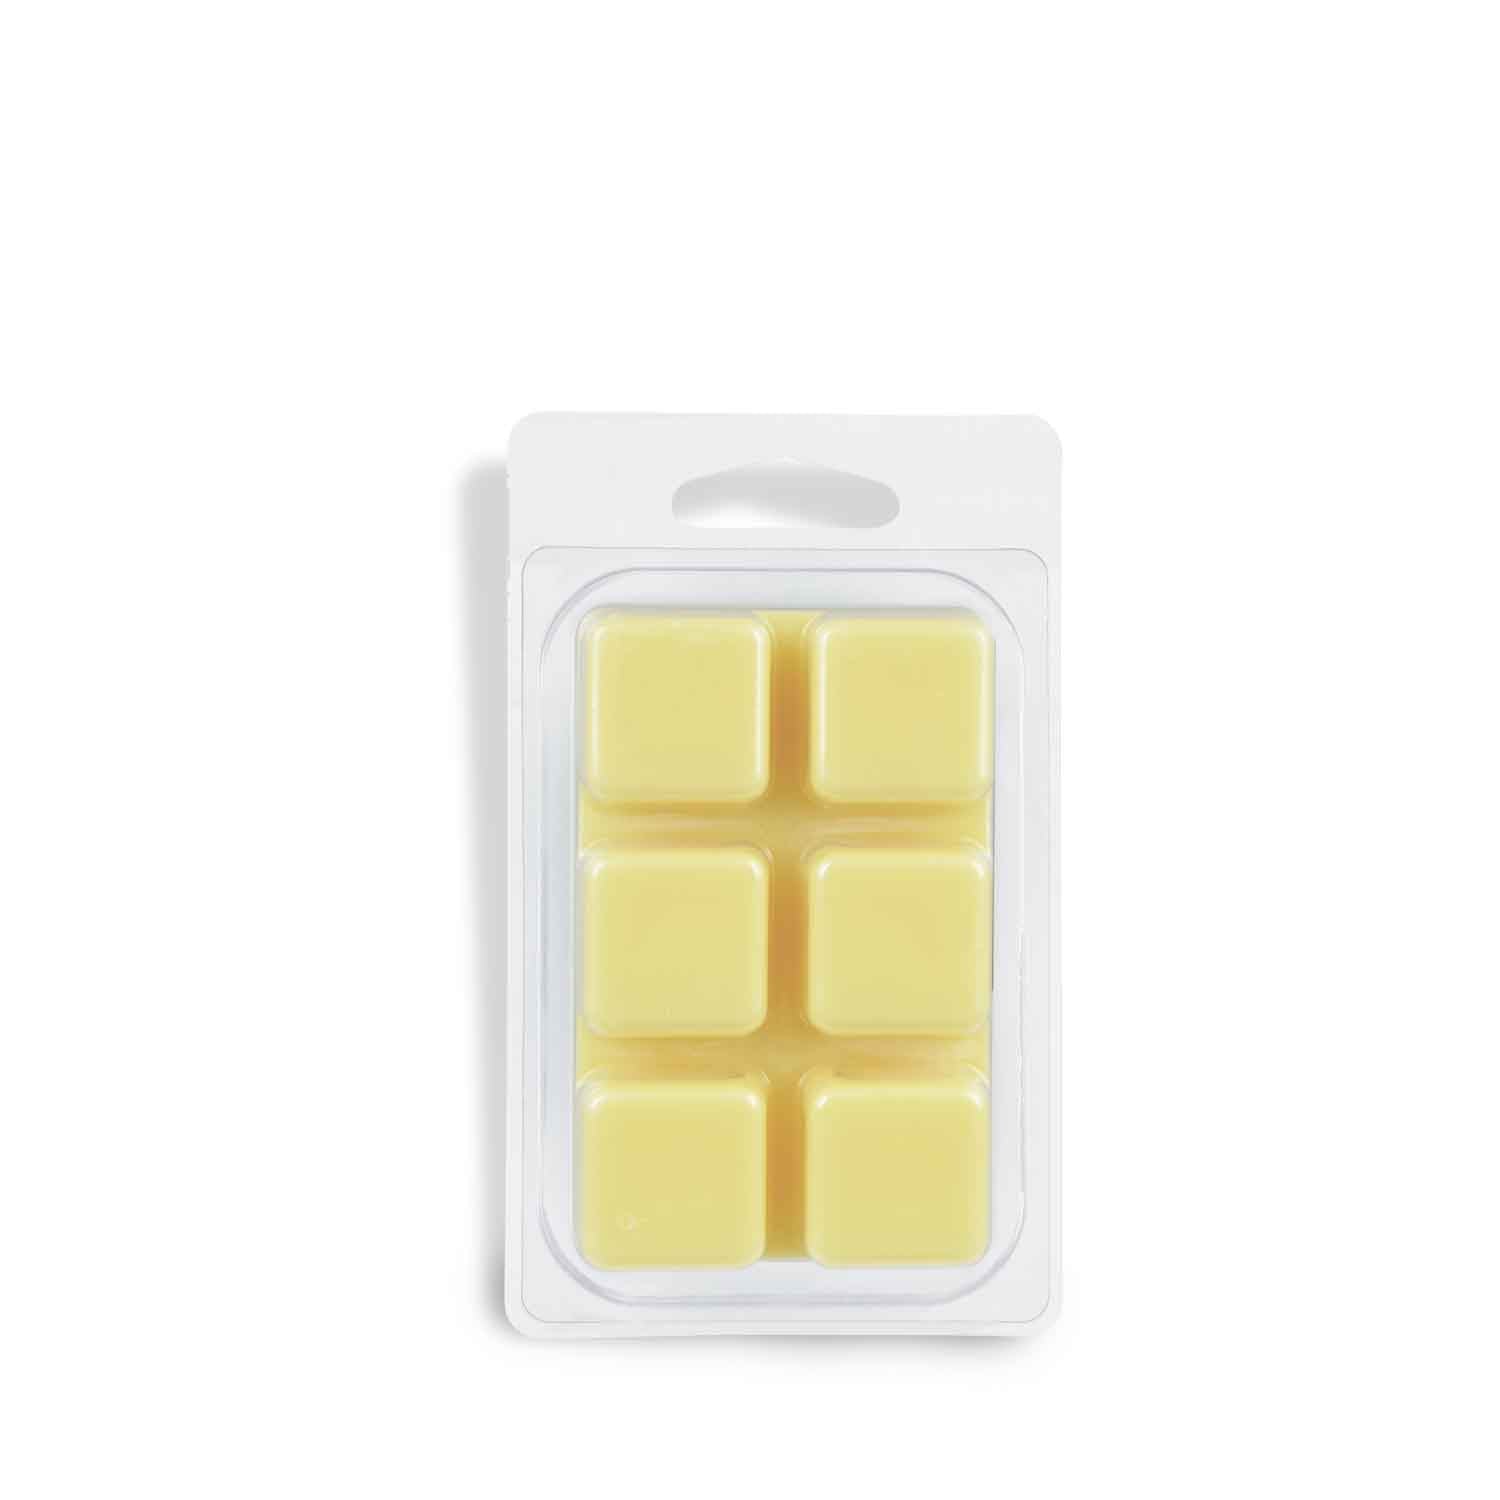 Wax Melts for the Classroom, Cabana Party, Coconut Lime Wax Melts